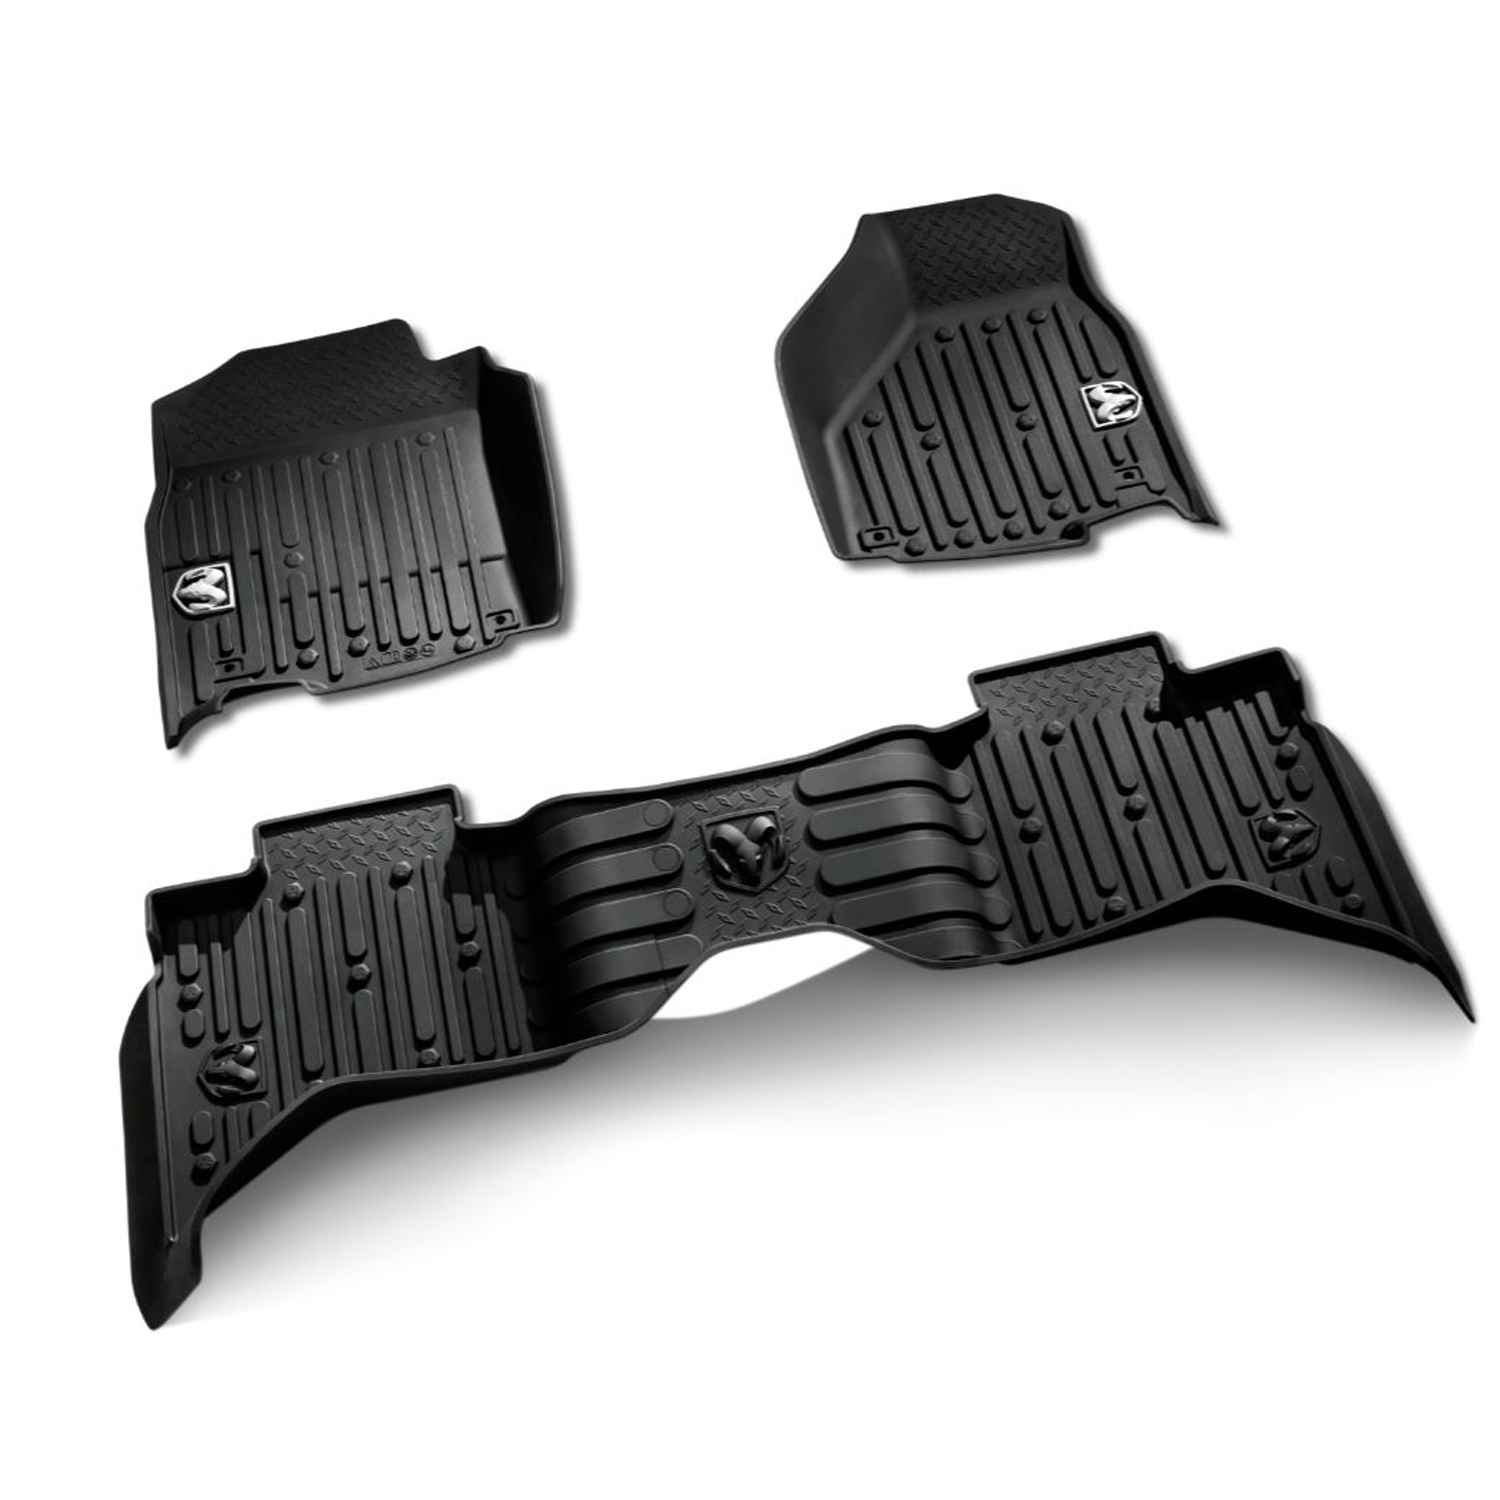 OEM 2014 Ram 4500 Chassis Cab All-weather Floor Mats, bucket-style, Regular Cab, Black (Part #82215579AB)